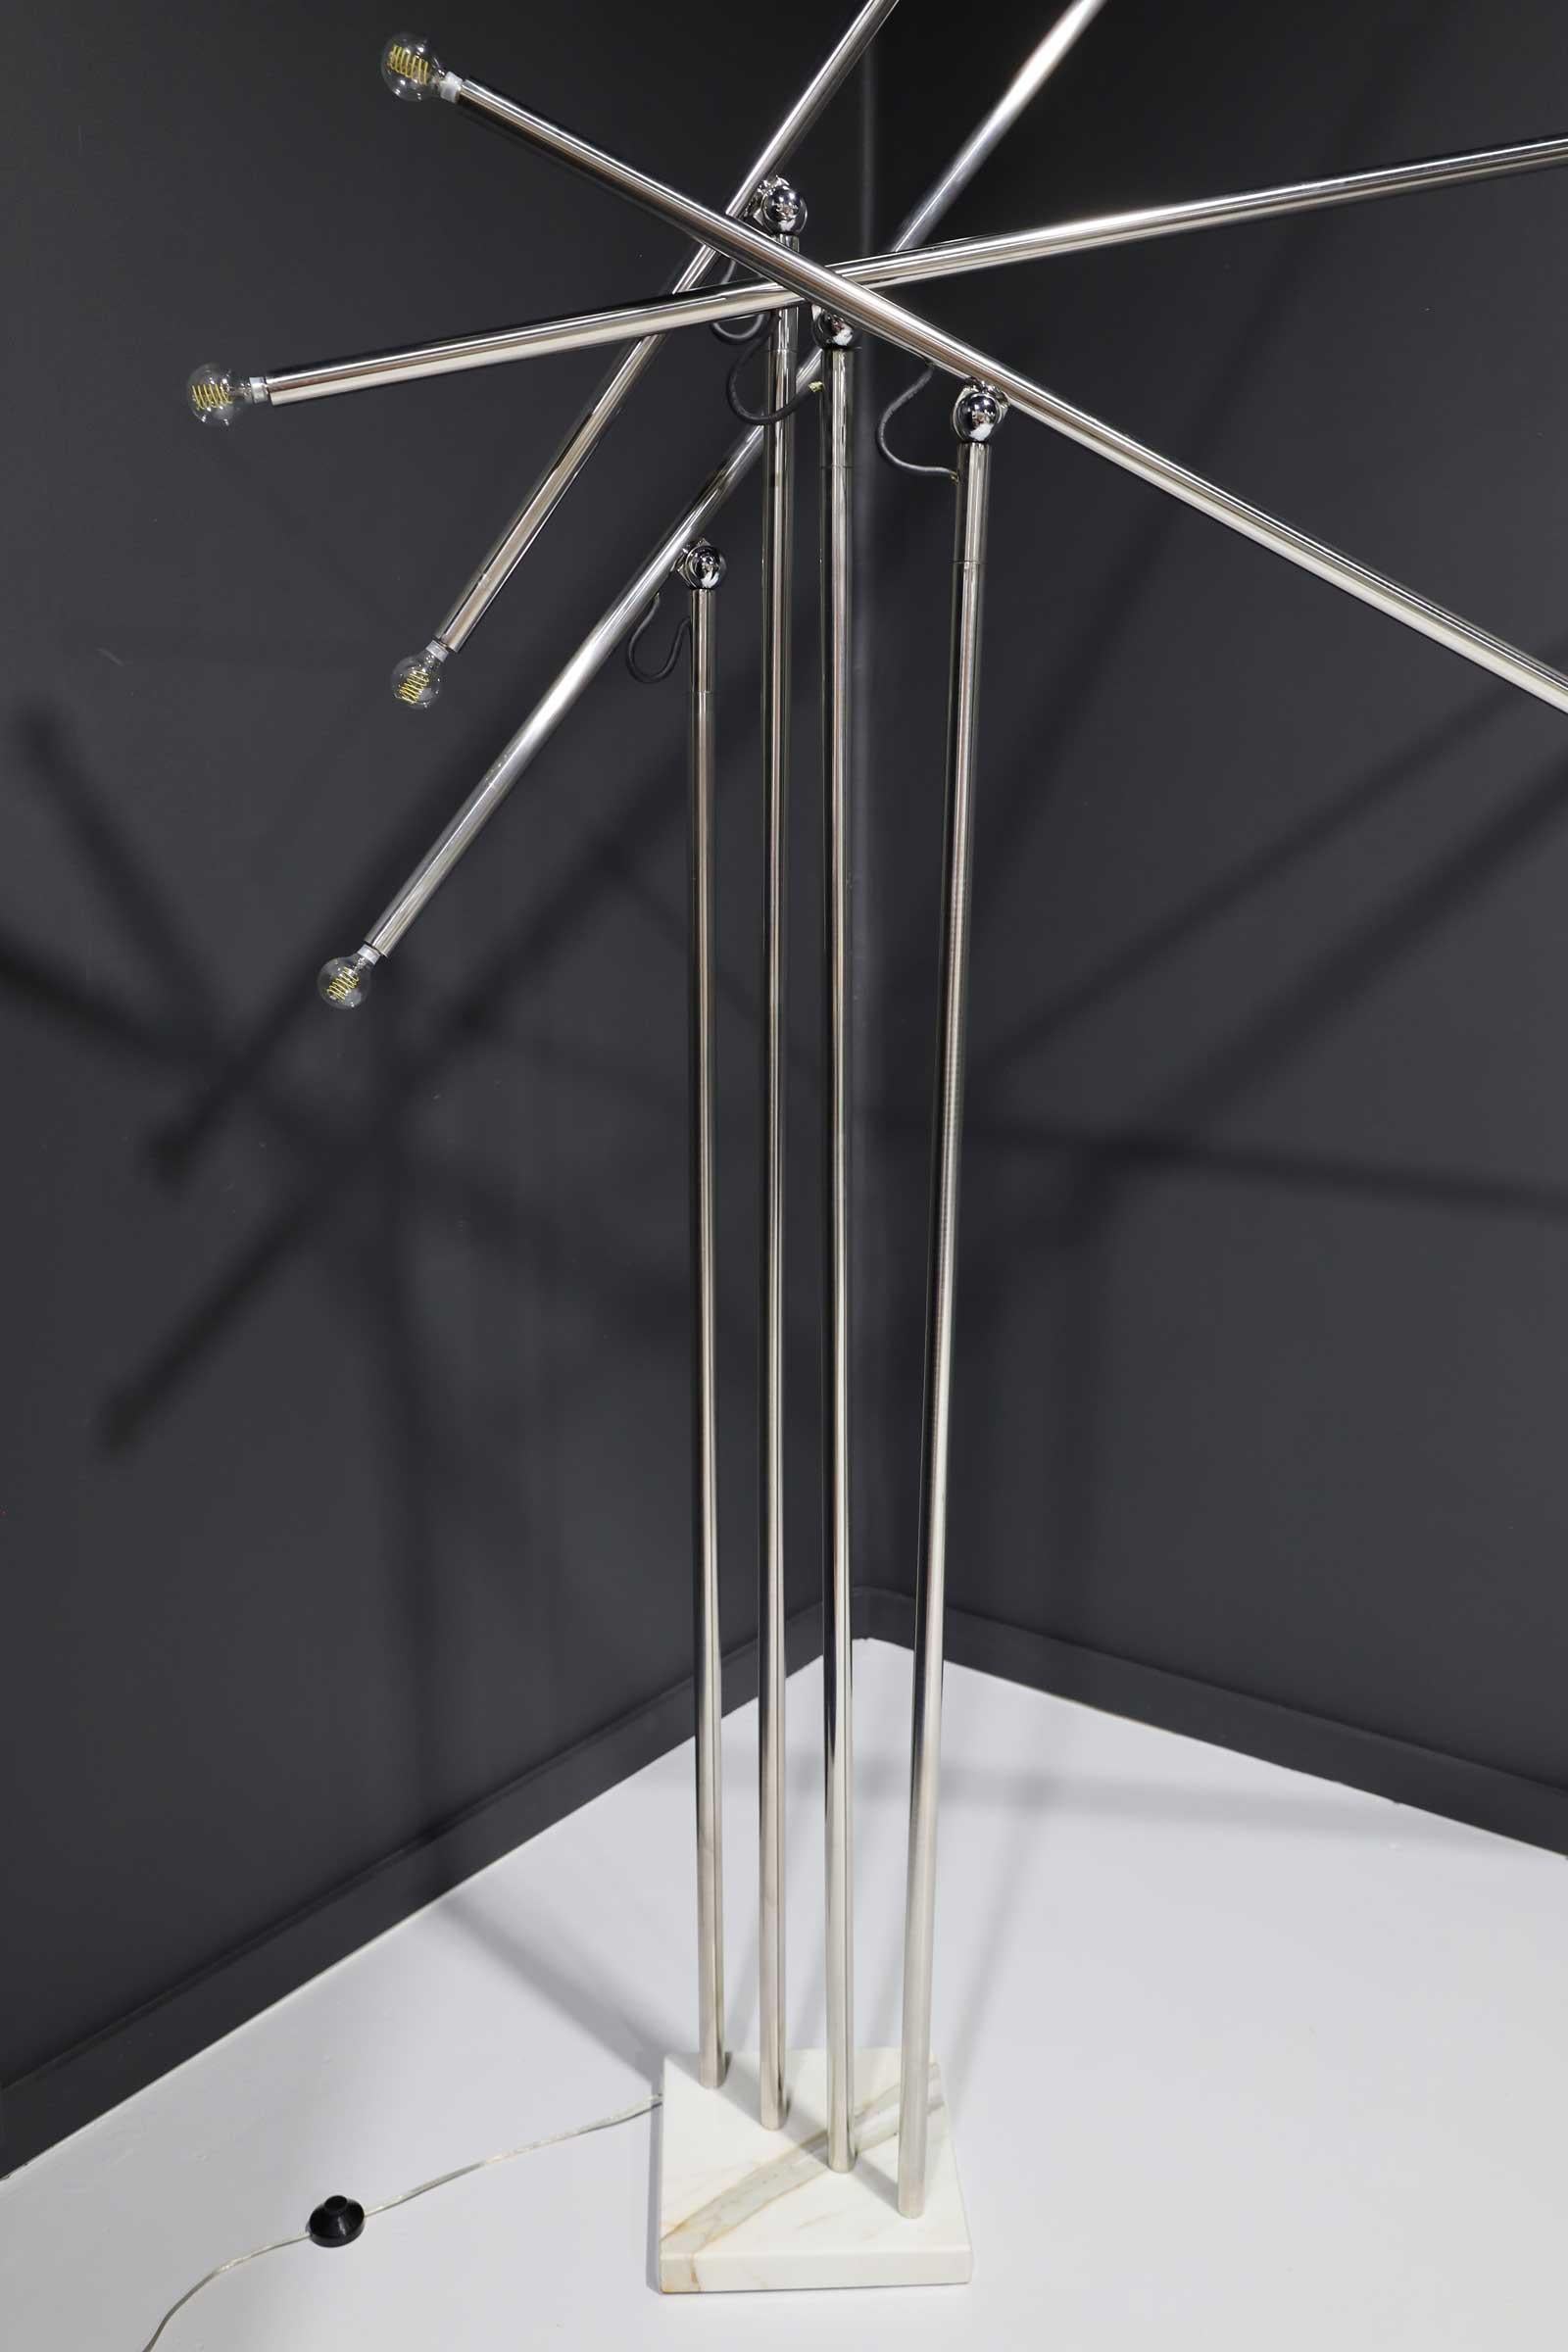 Chromed steel with four adjustable arms. Marble base. Made in Italy.